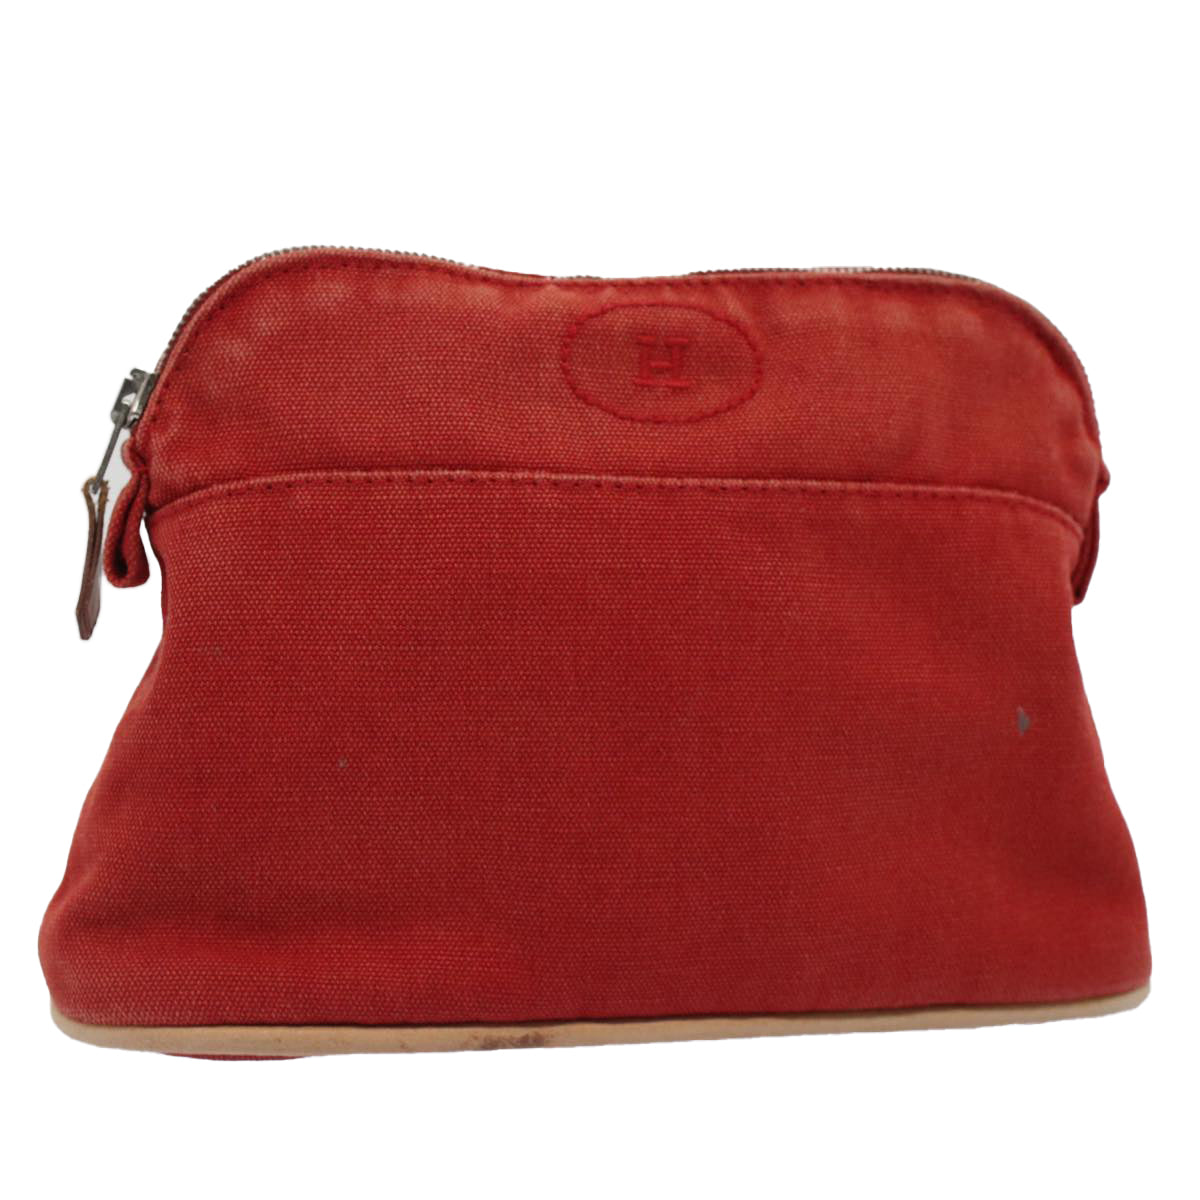 HERMES Pouch Canvas Red Auth 51305